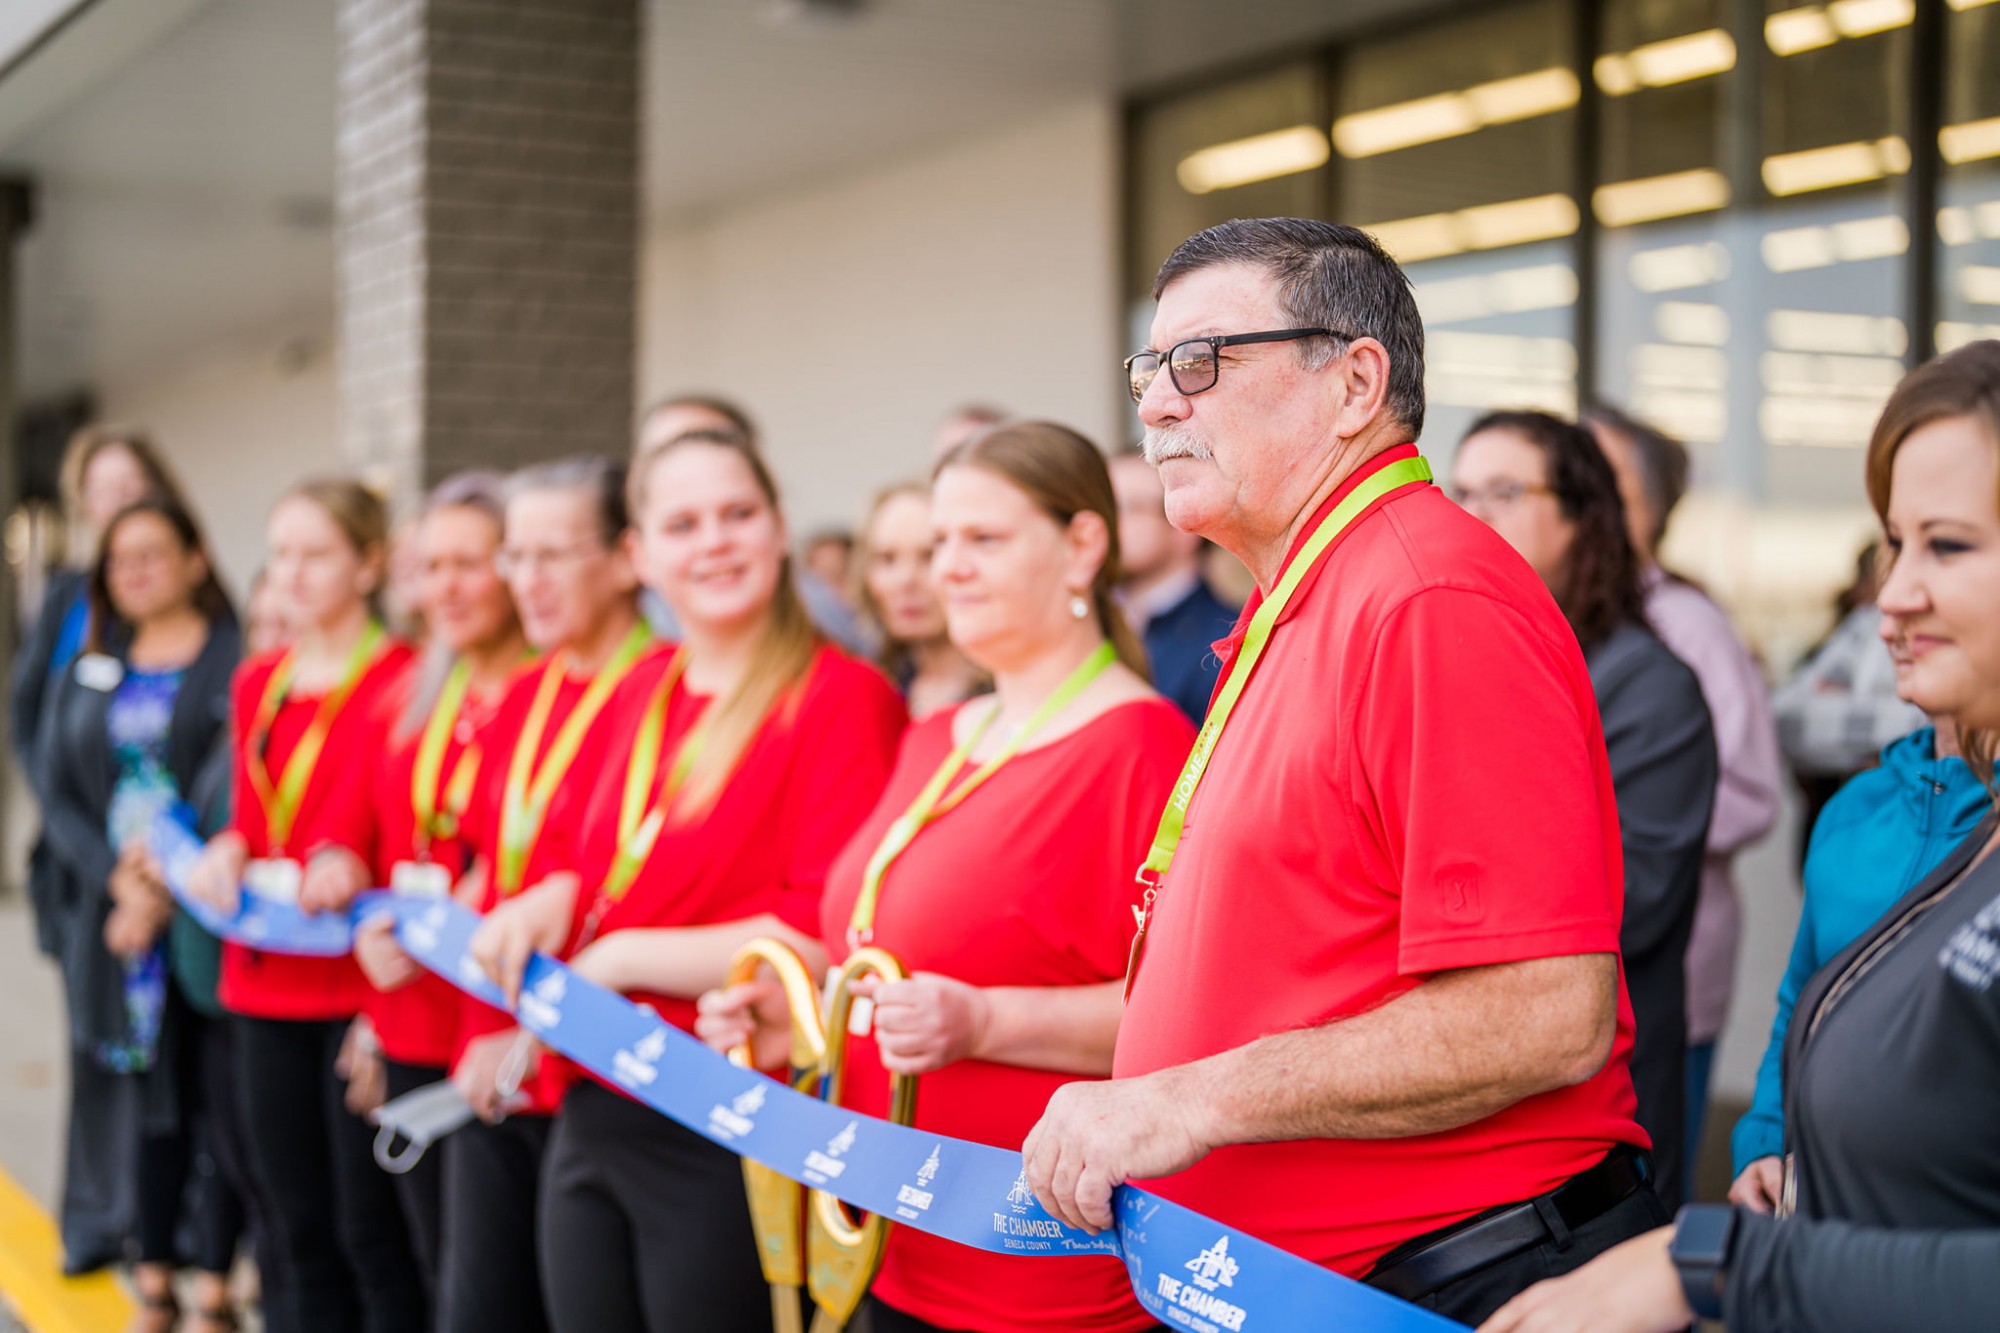 Burke's Outlet Home Centric Celebrate Grand Opening with Ribbon